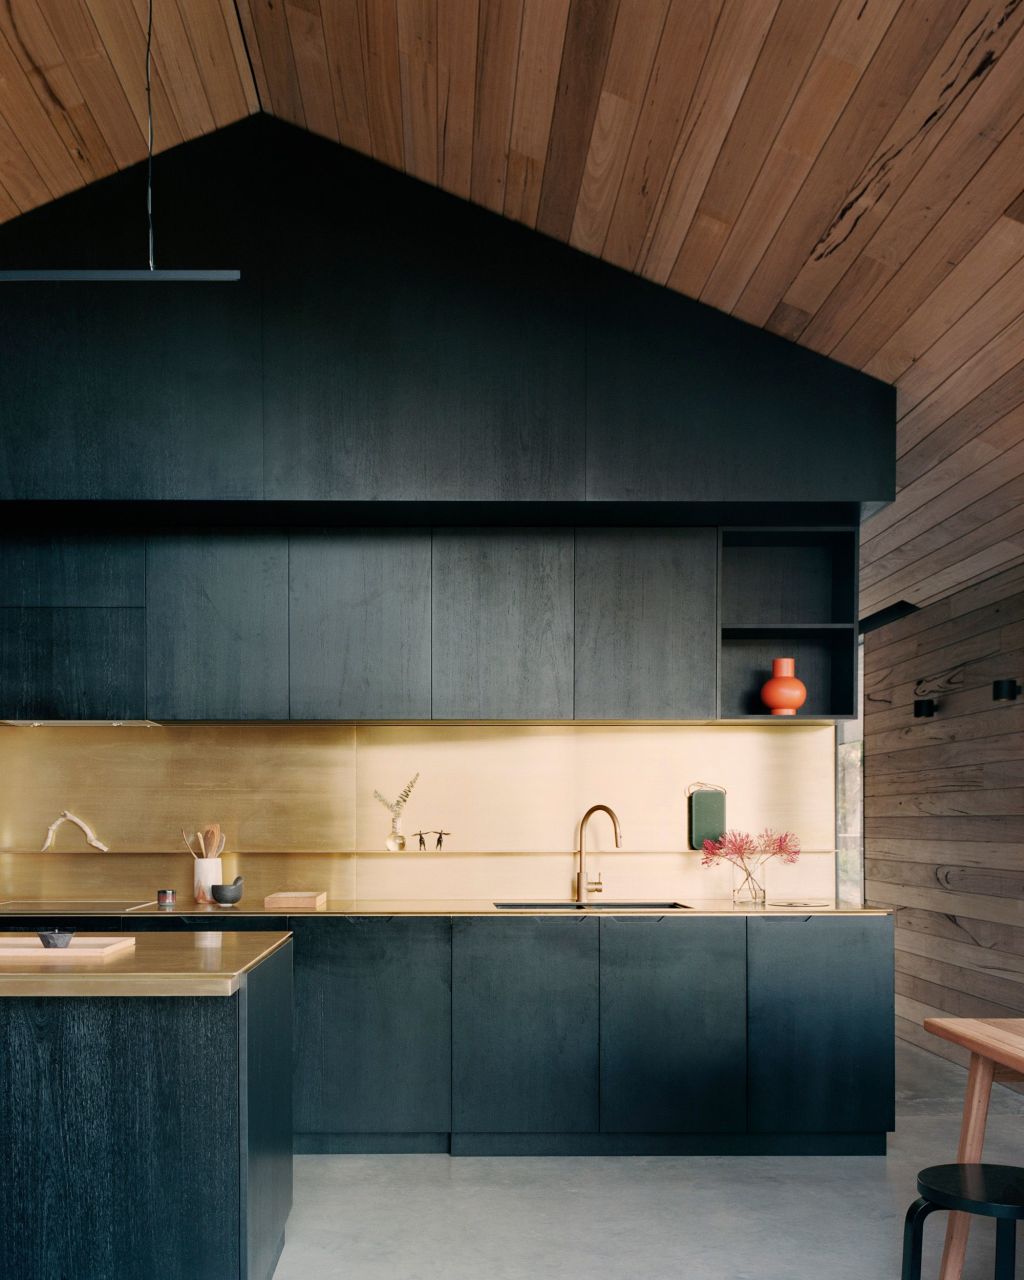 The kitchen comes with a brass splashback. Photo: Rory Gardiner